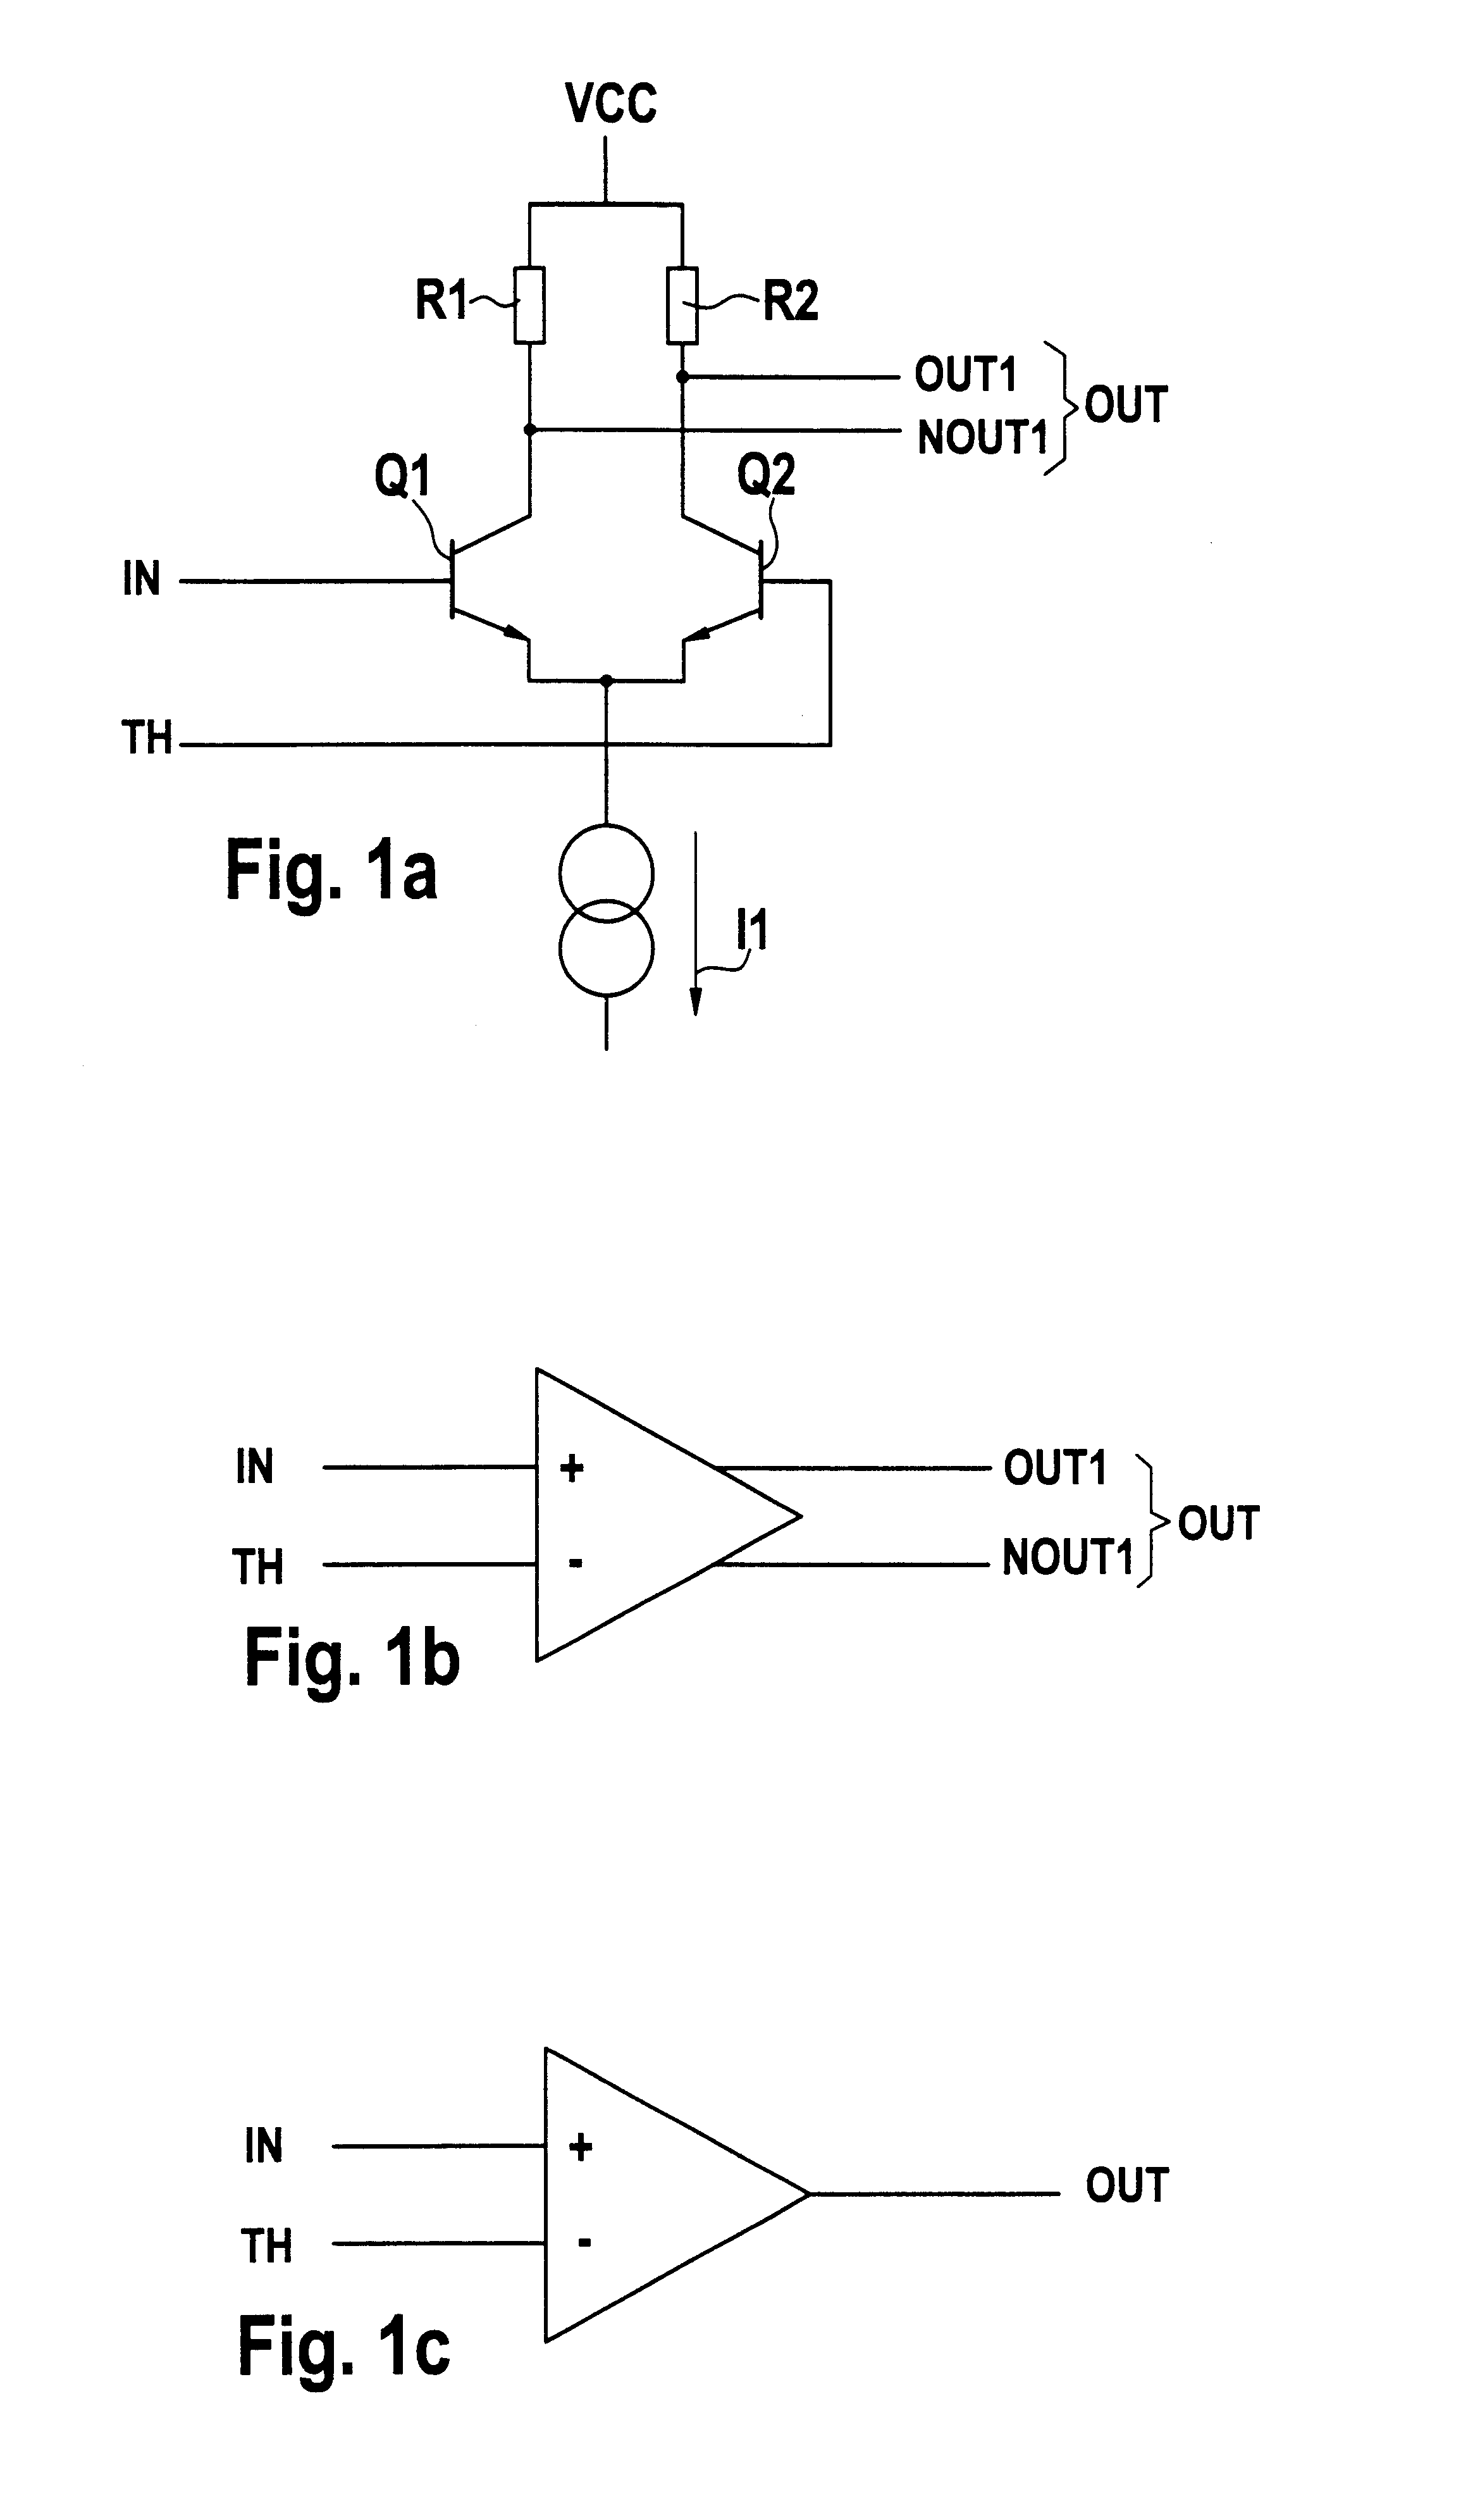 Circuit for providing a logical output signal in accordance with crossing points of differential signals